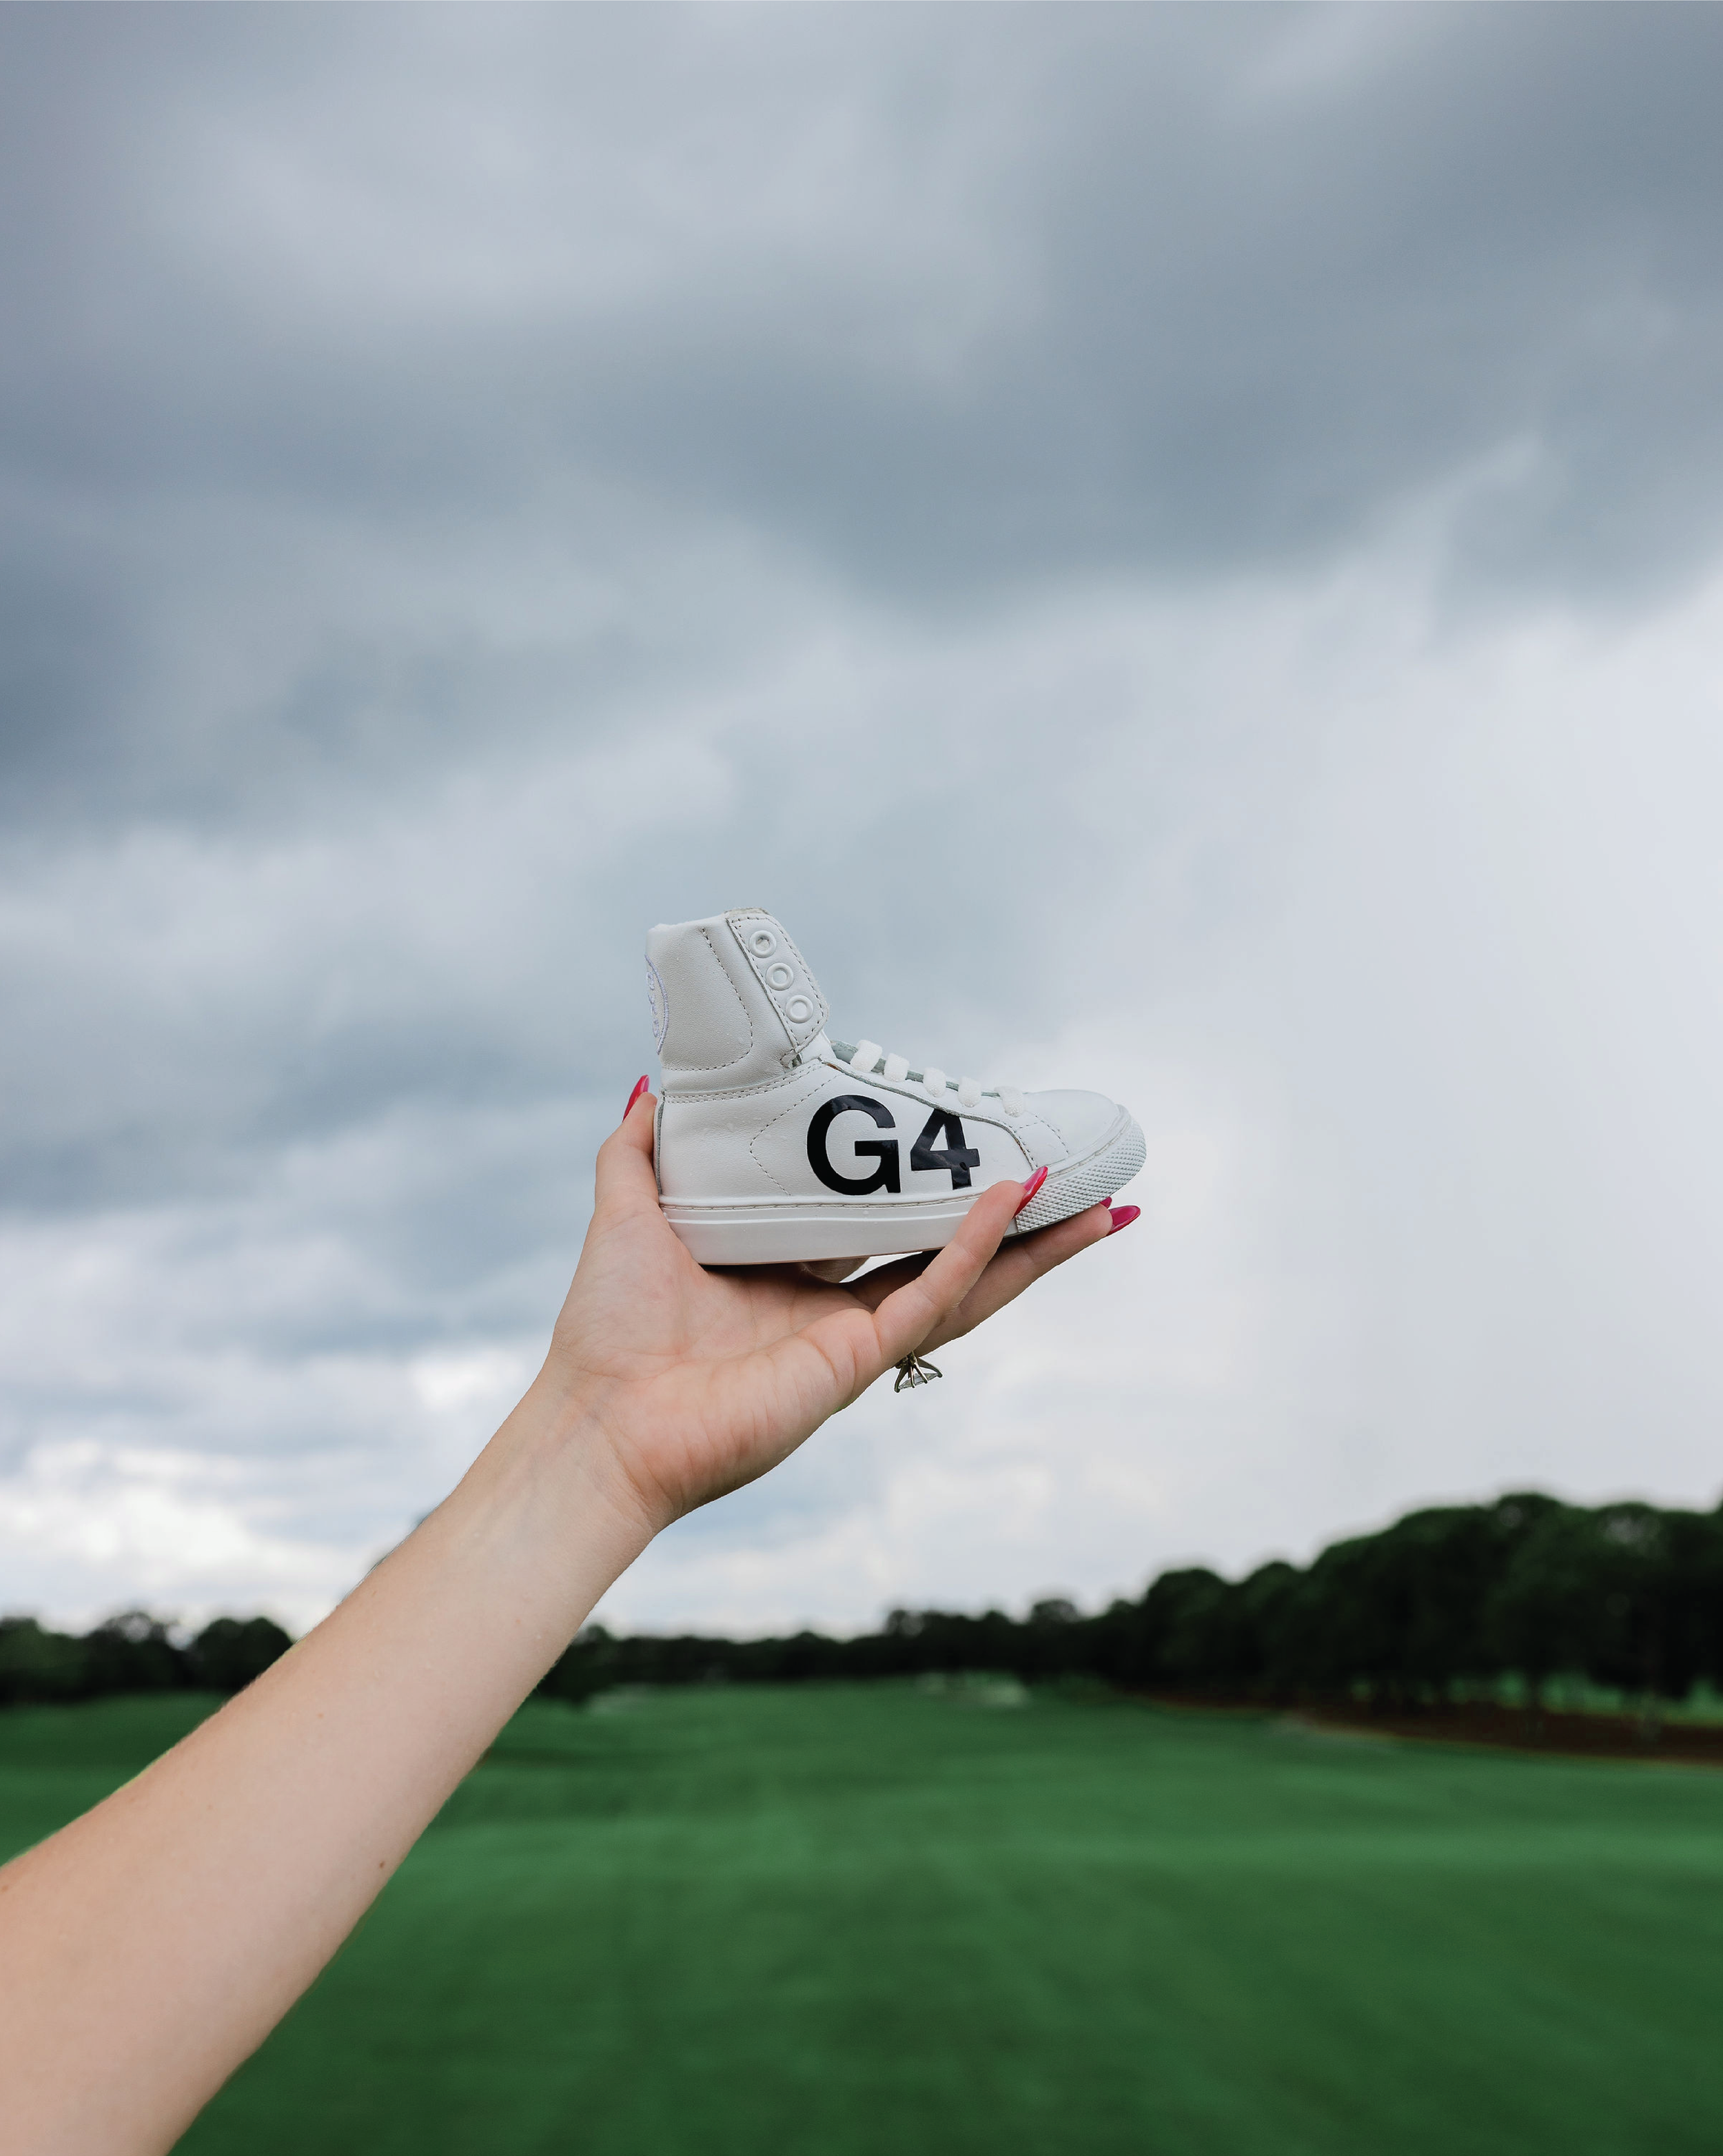  Baby shoe with “G4” text held up against sky. 